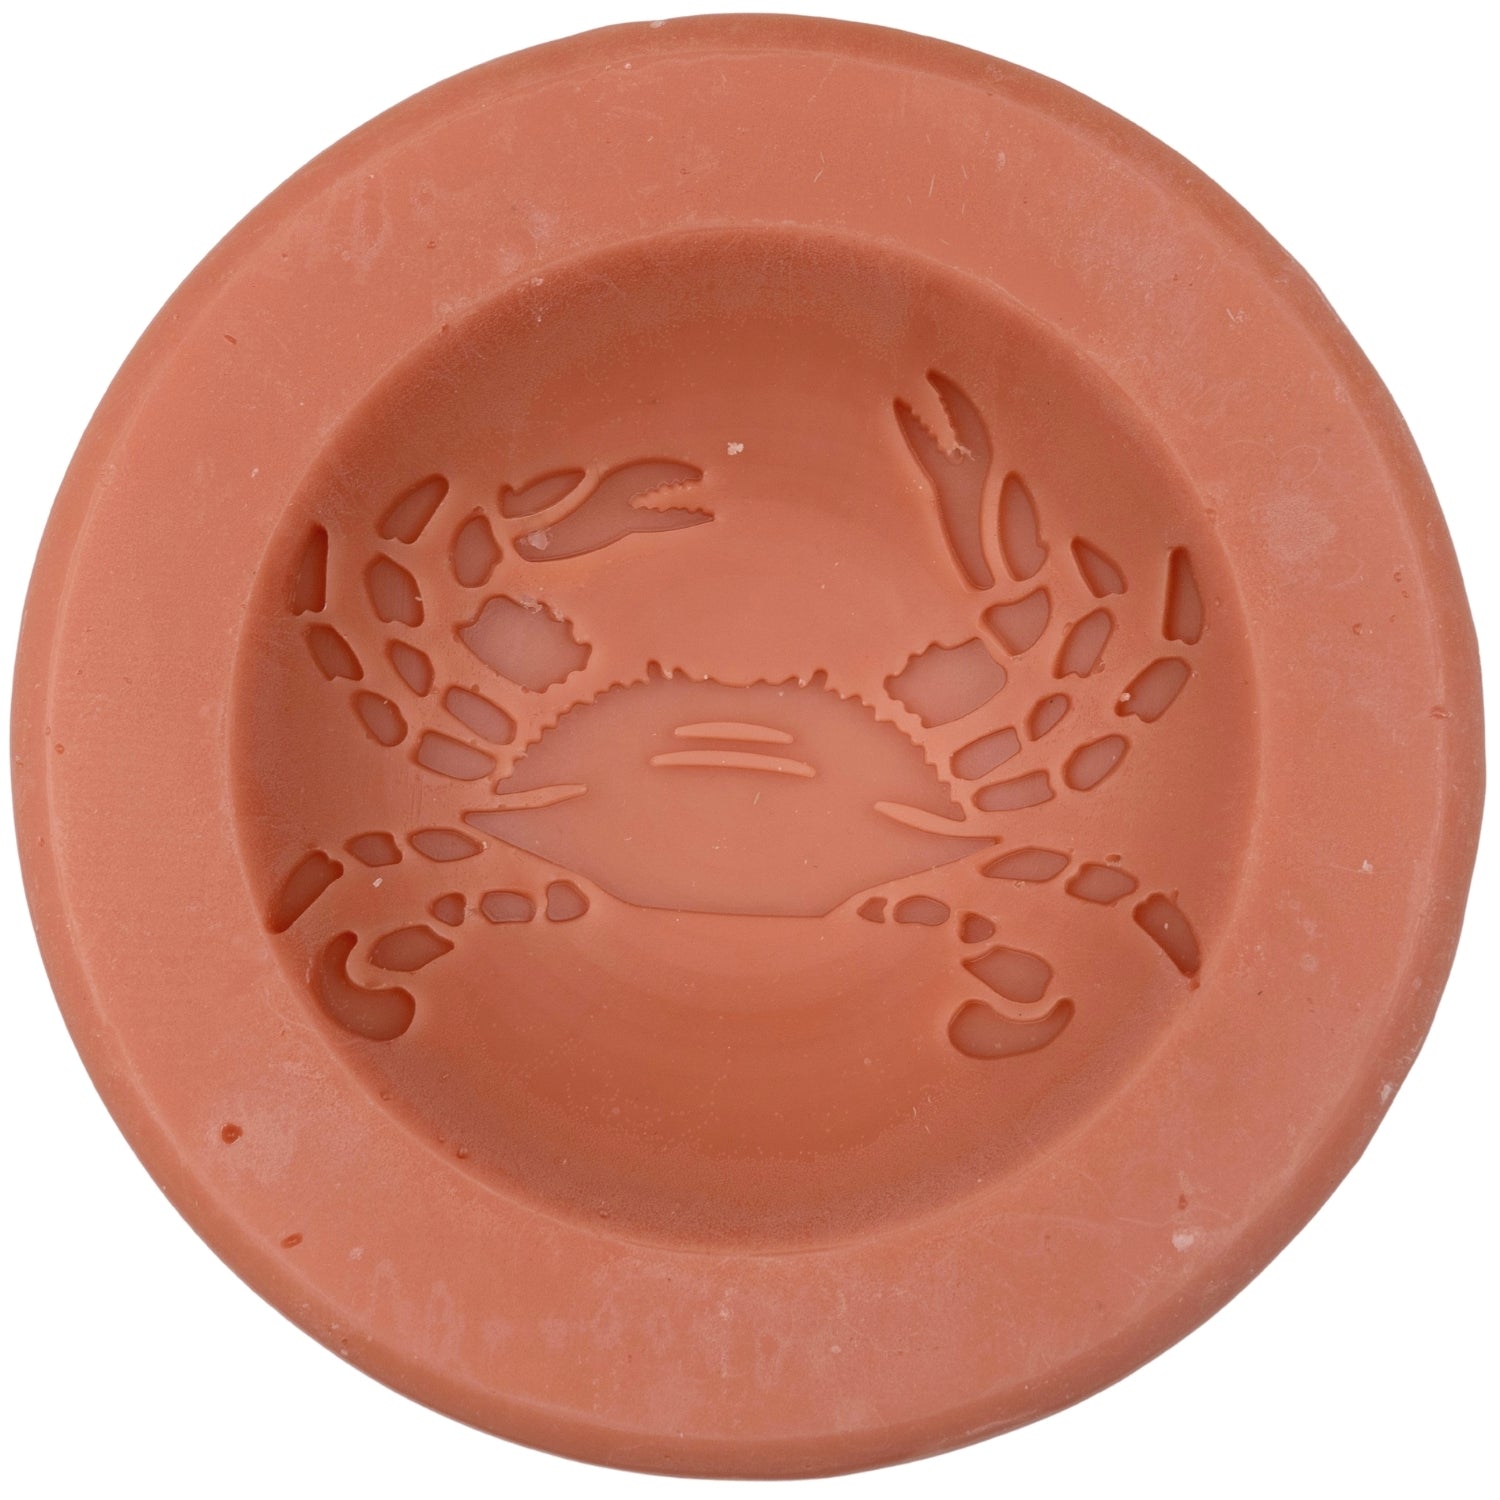 Apple Jack & Peel 7" Scented Vessel w/ Stand (Crab) by Scented Vessel